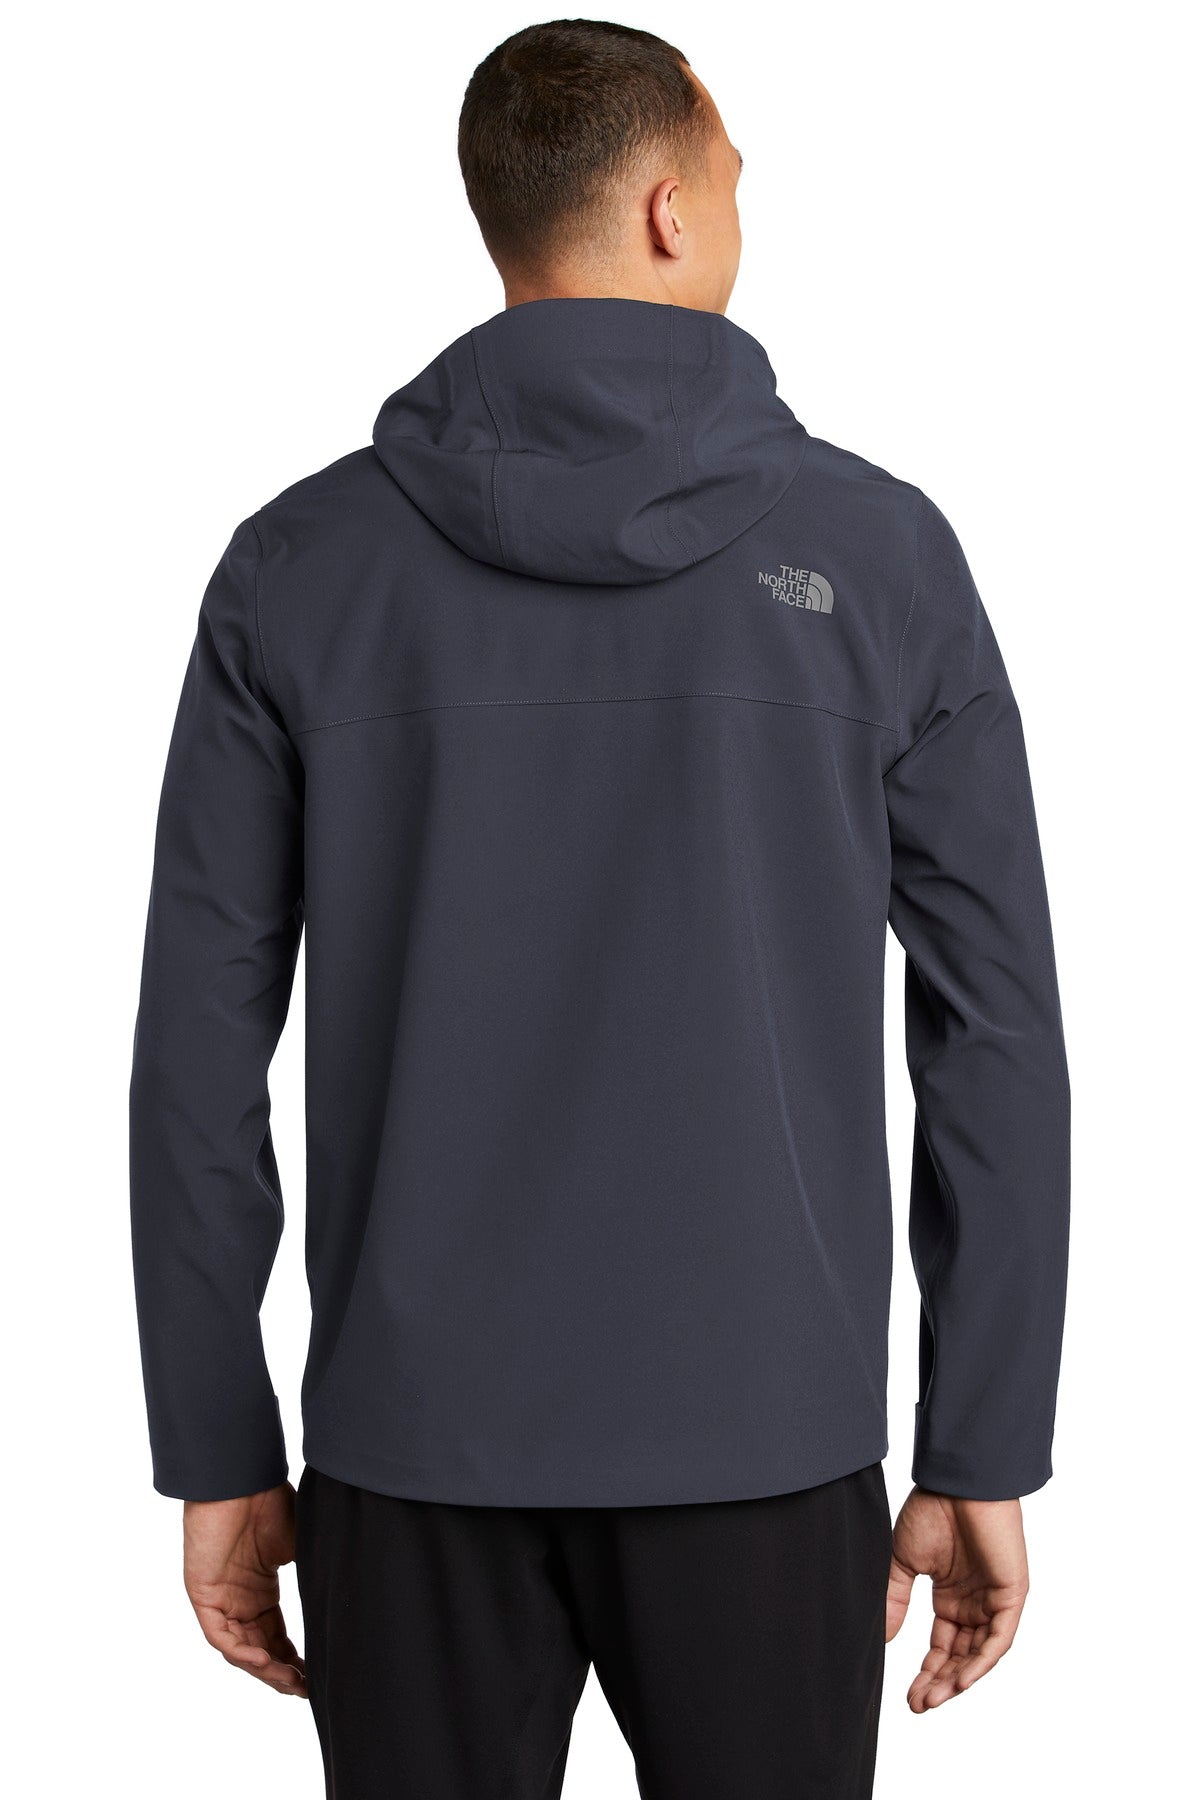 The North Face Apex DryVent ™ Jacket NF0A47FI